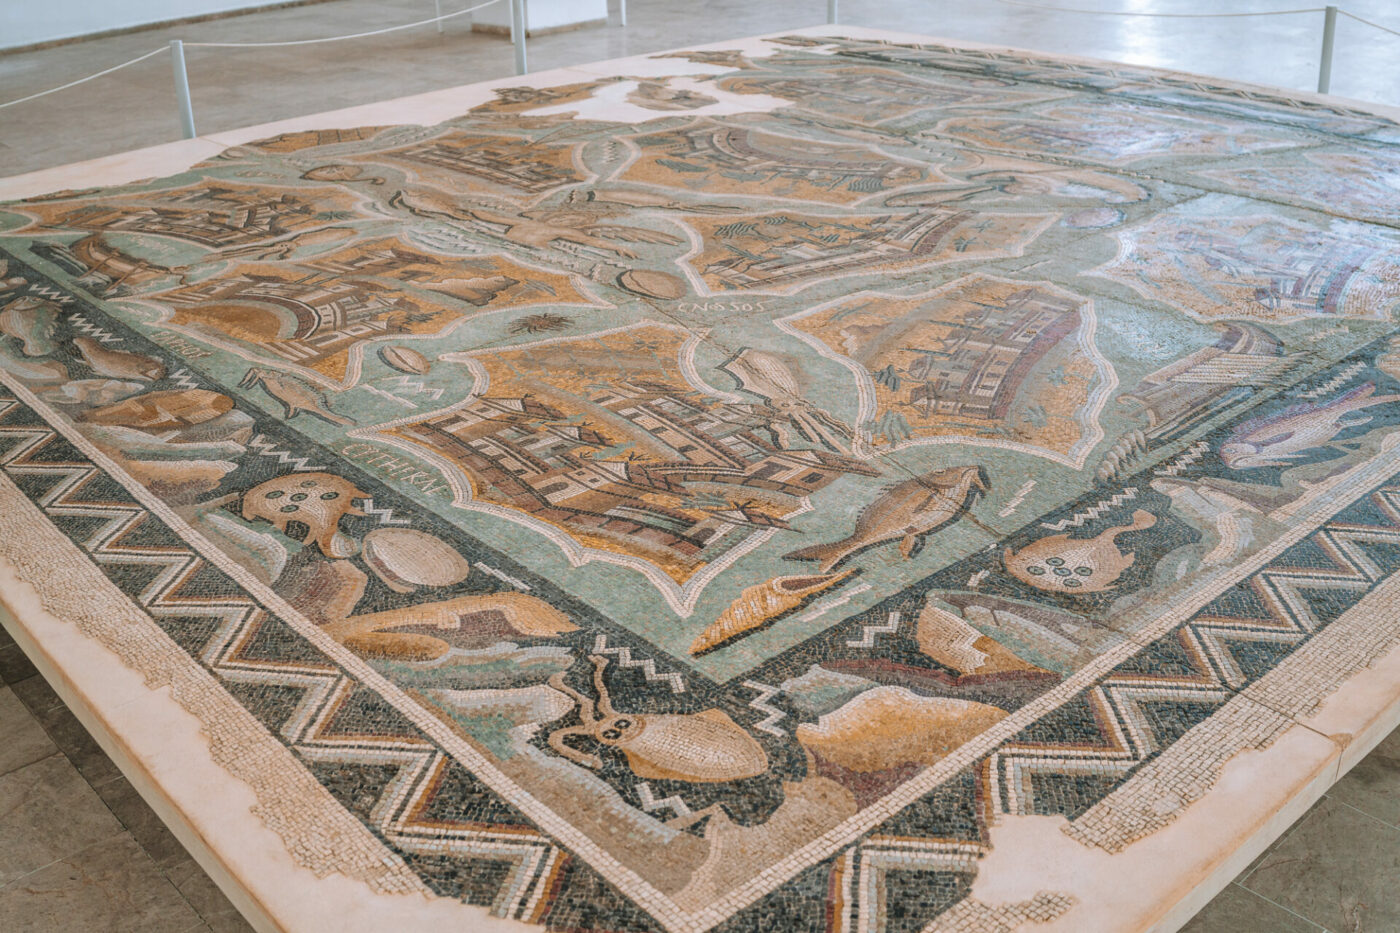 Mosaic works in Carthage Museum